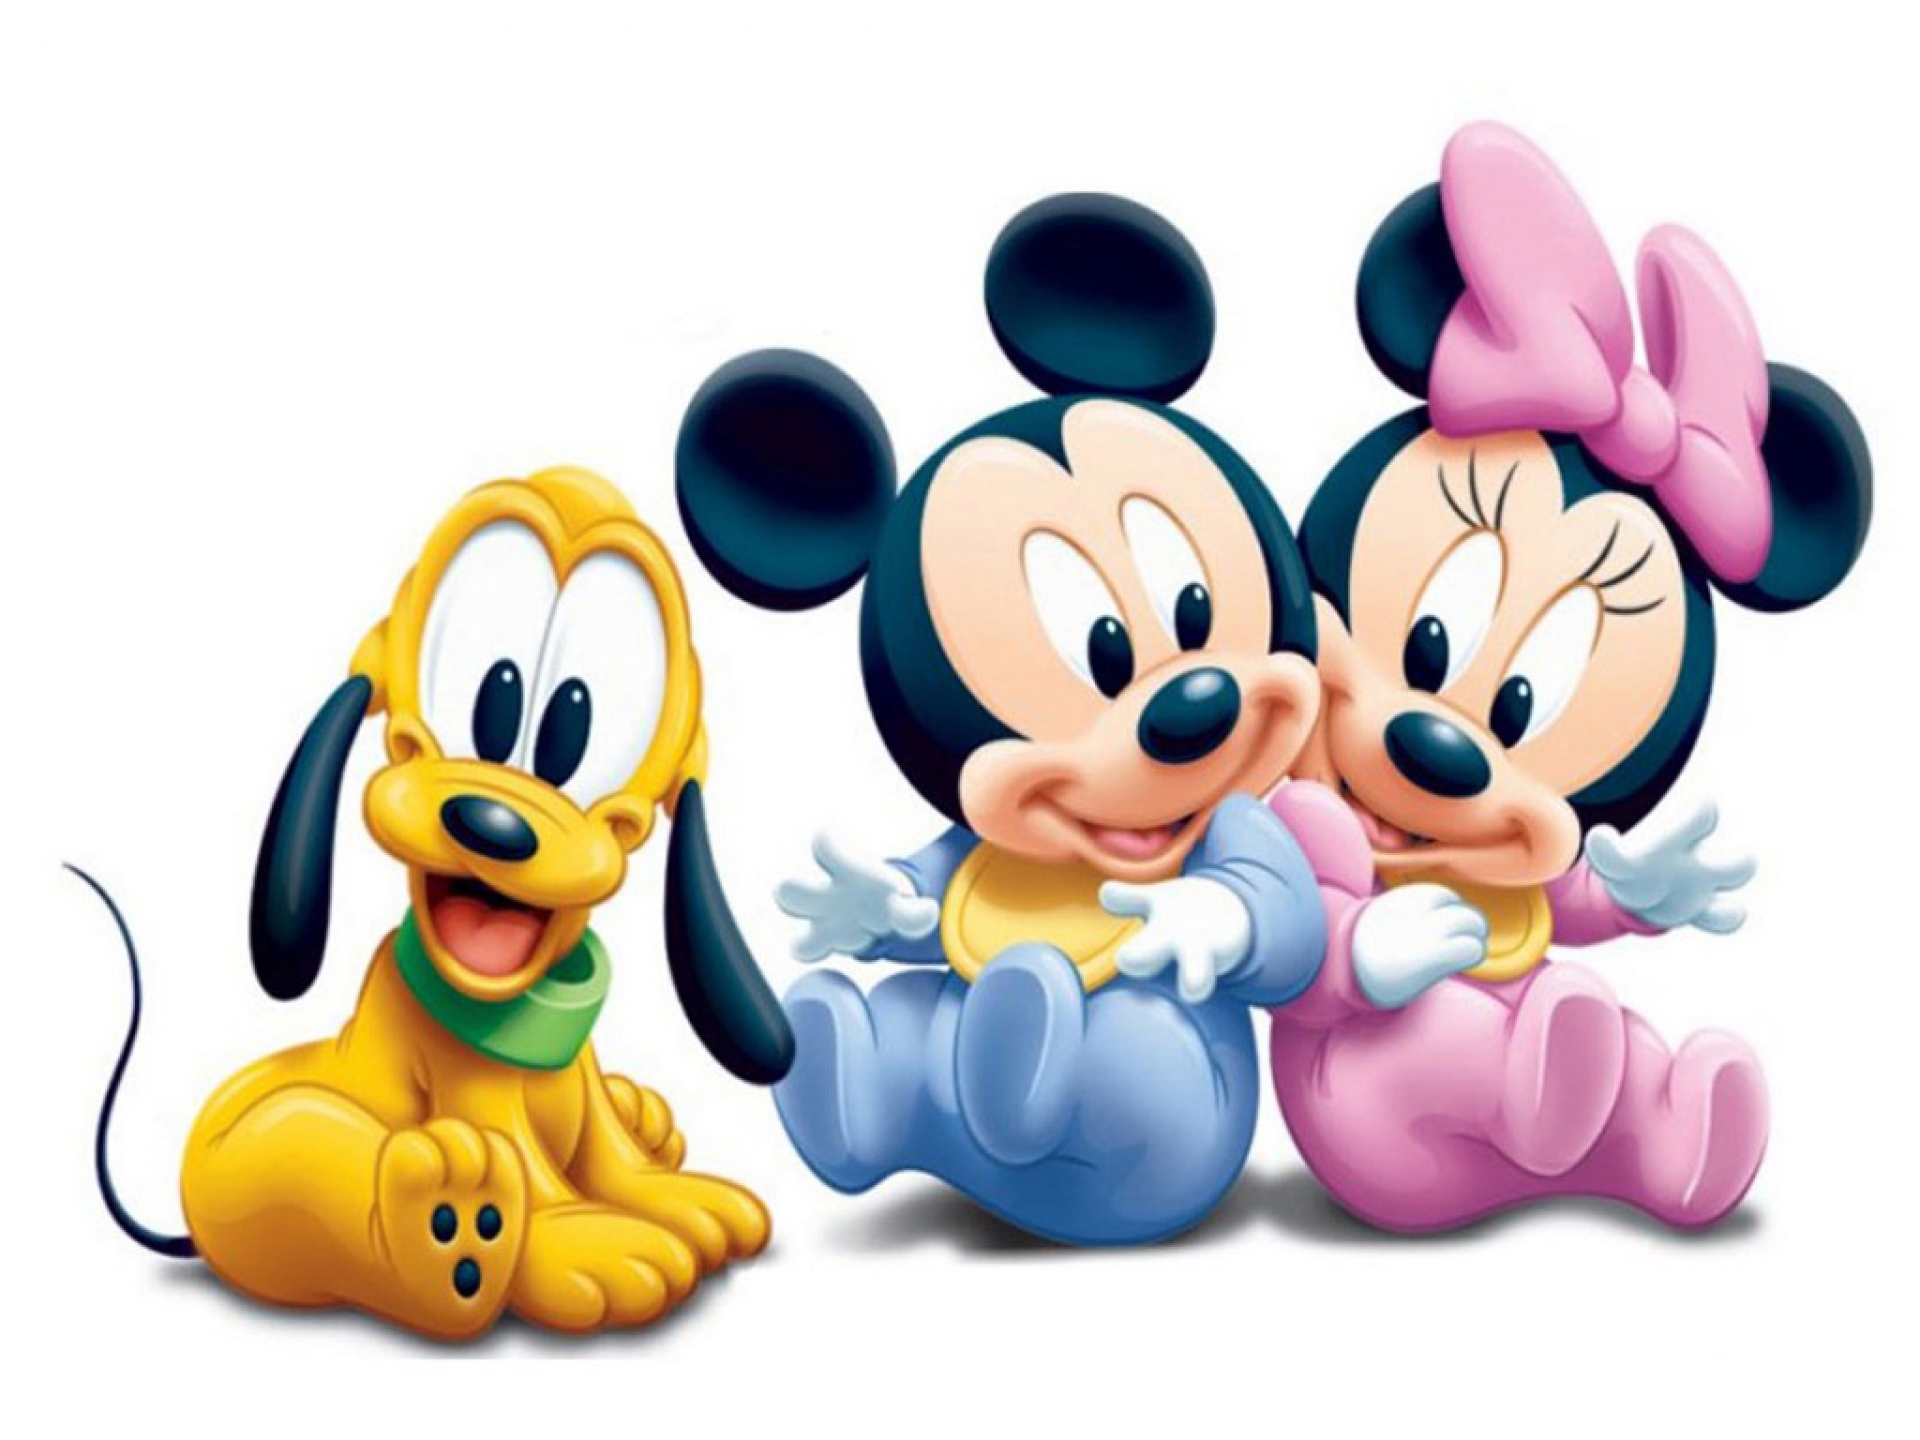 Free Baby Disney Cartoon Characters, Download Free Clip ...